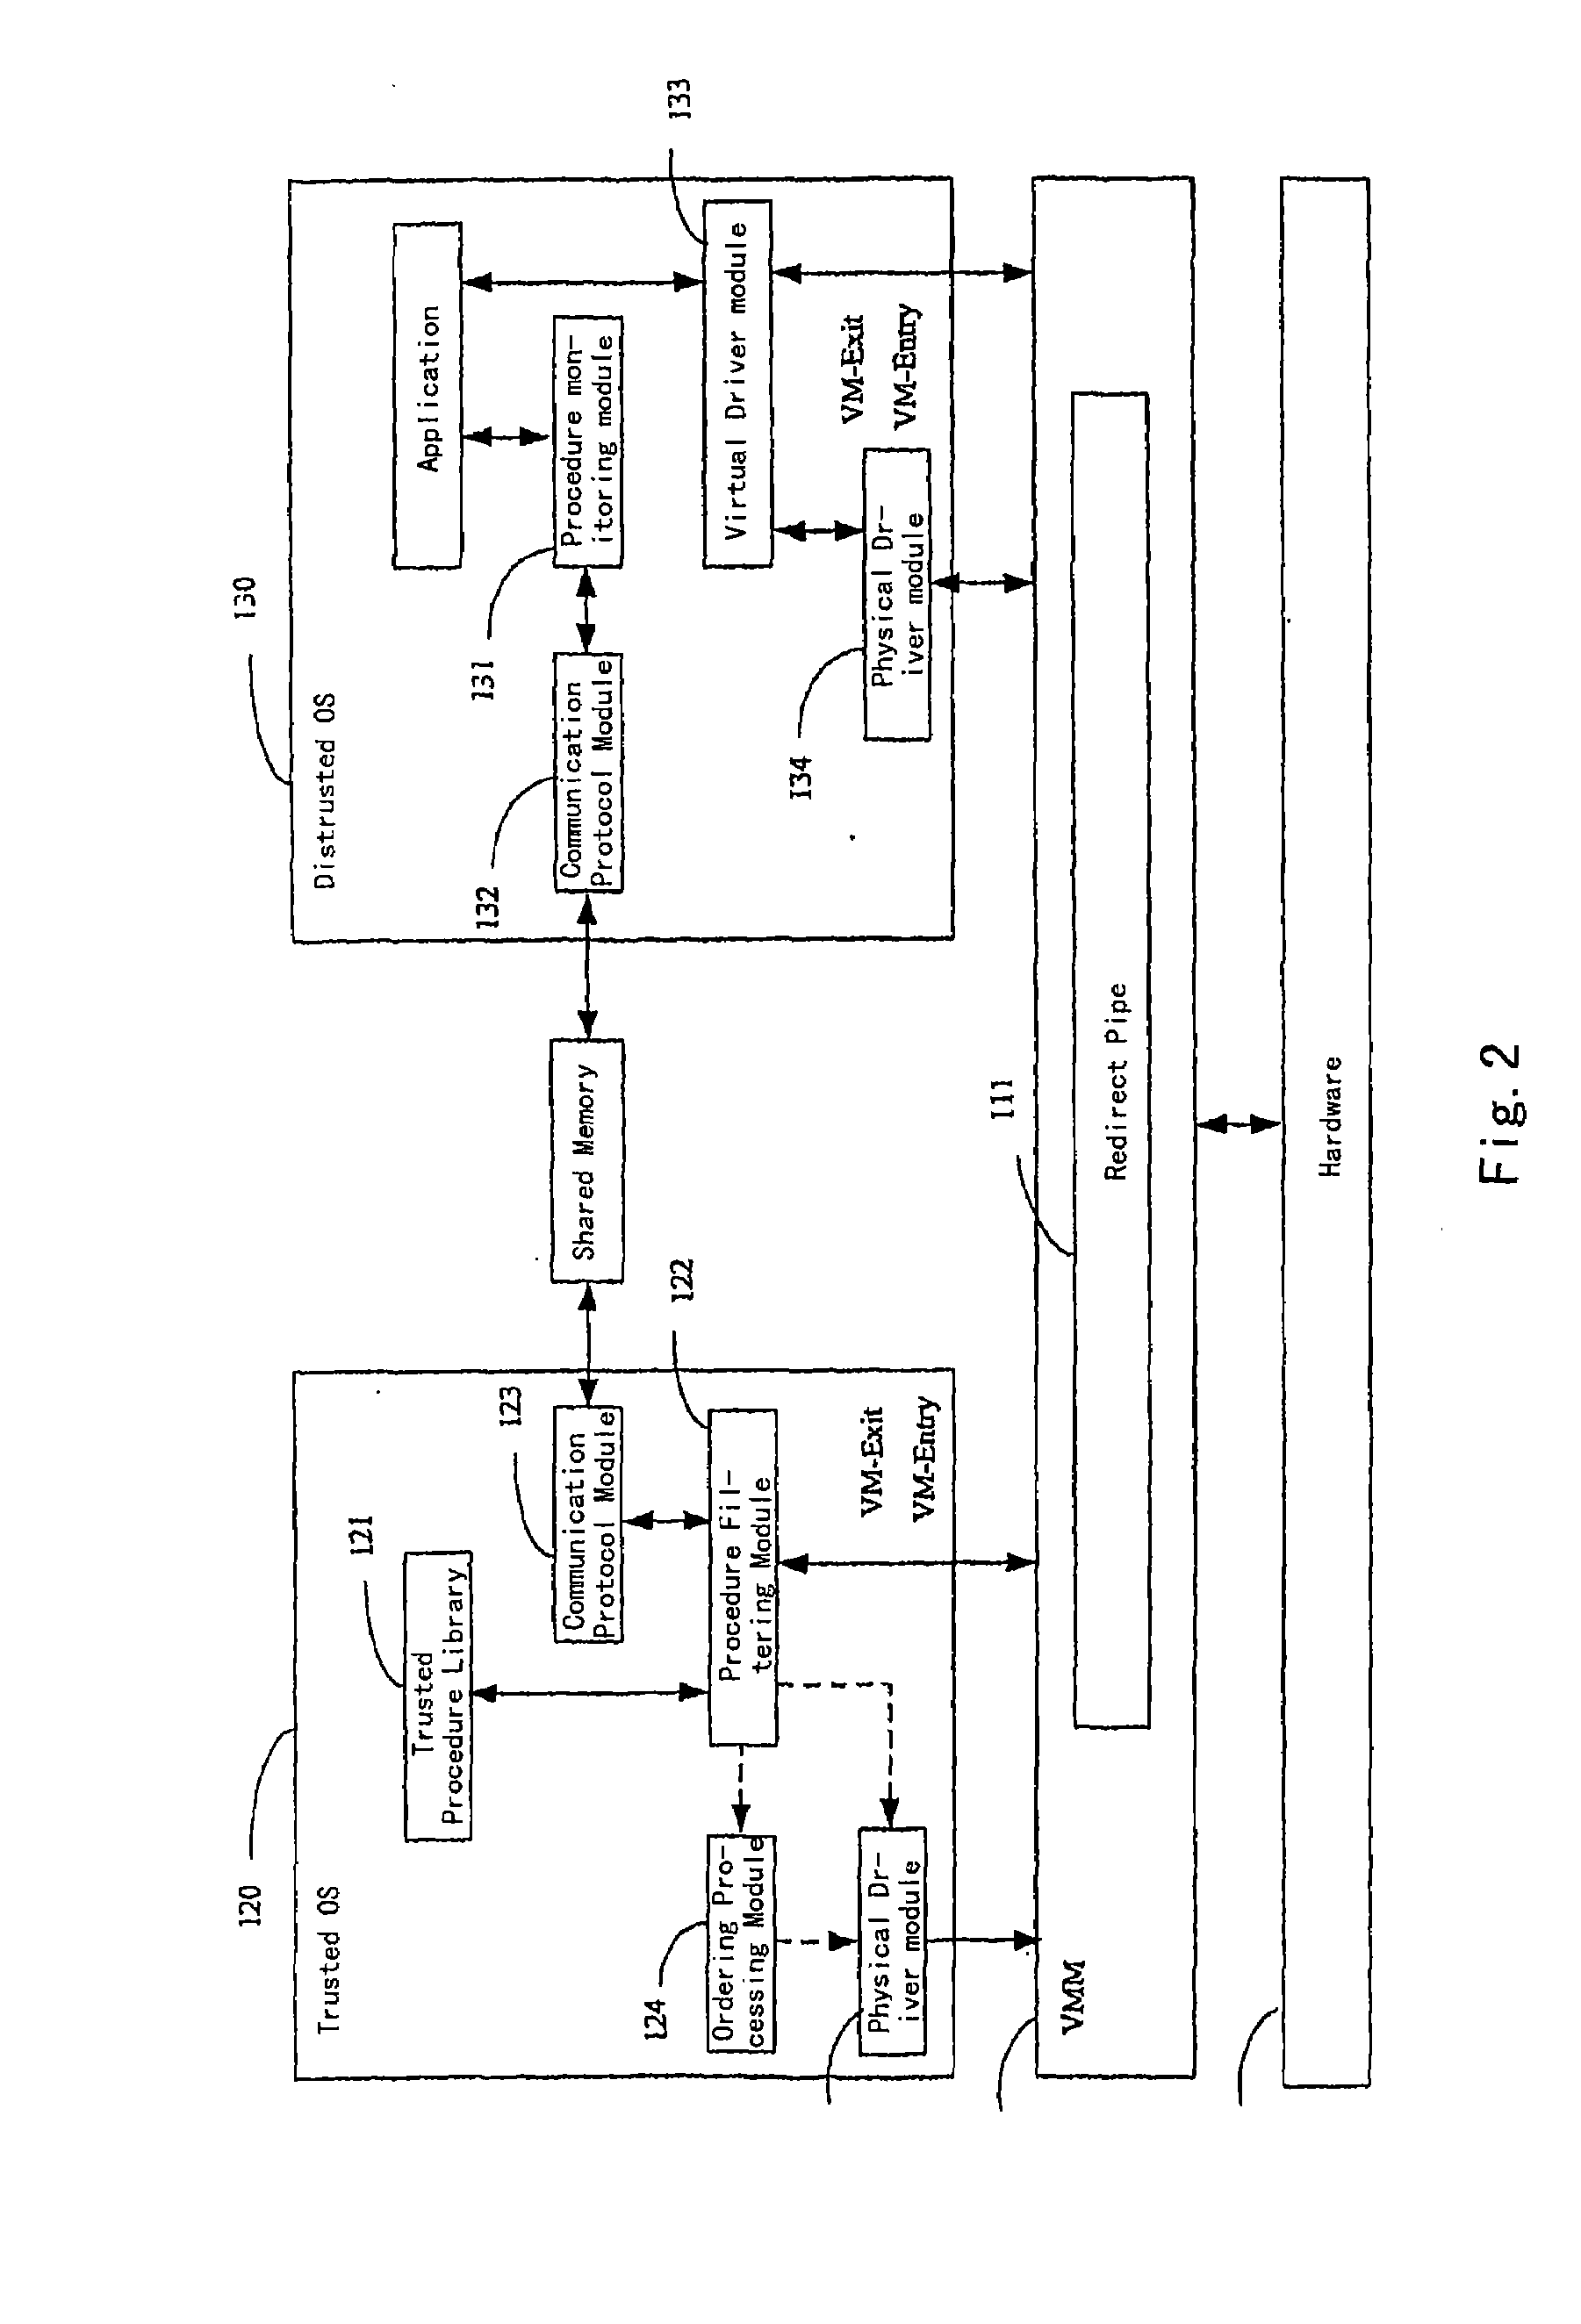 Virtual Computer System Supporting Trusted Computing and Method for Implementing Trusted Computation Thereon